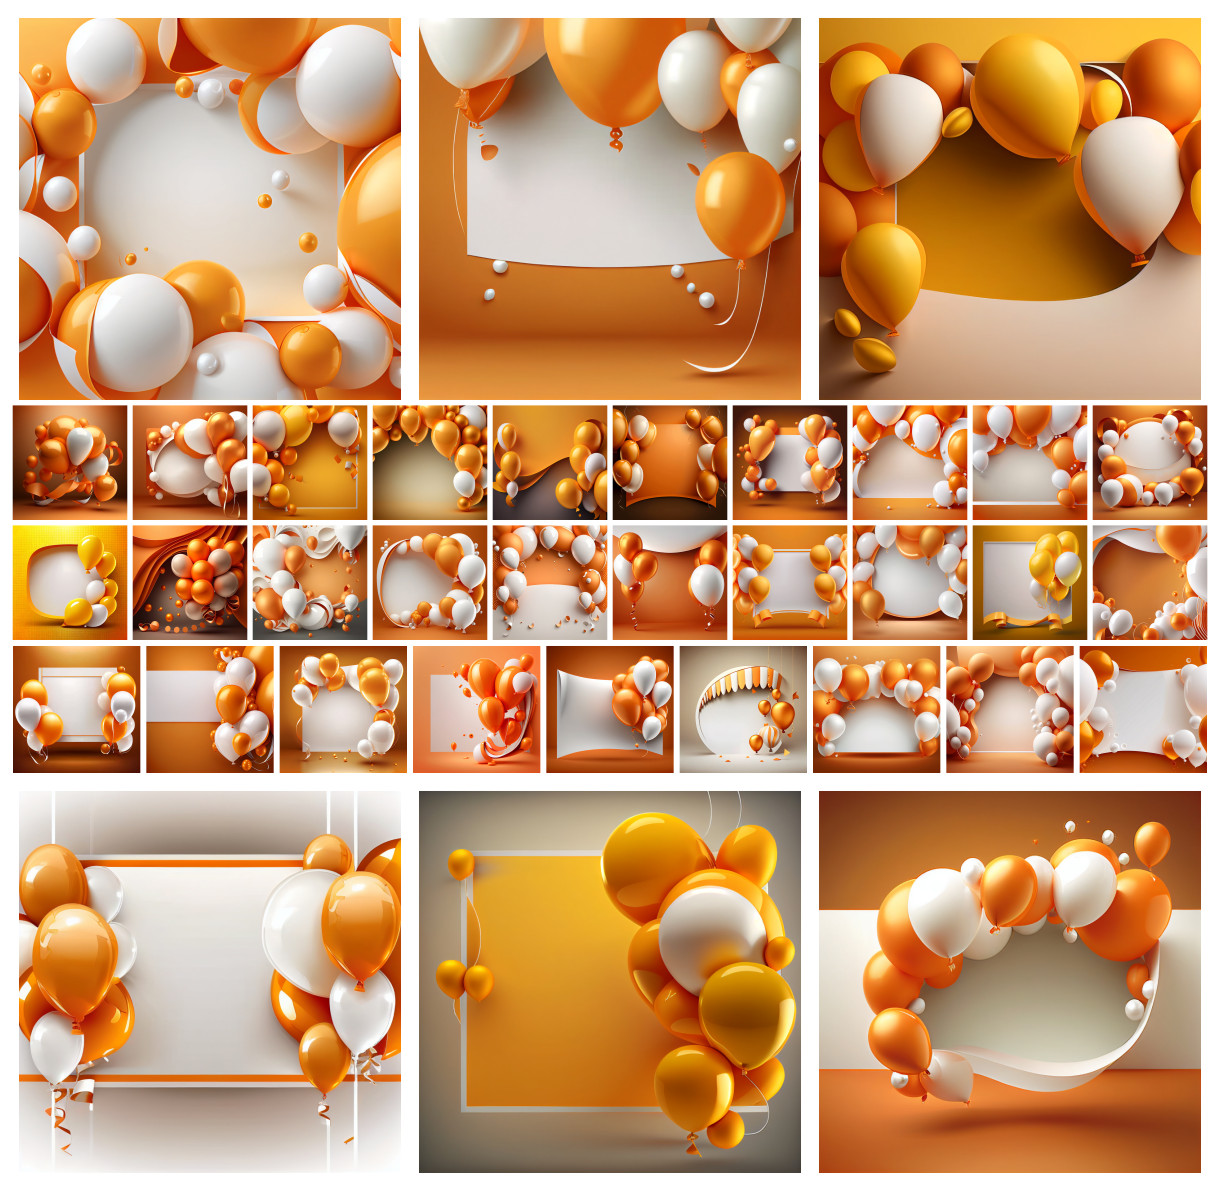 Bask in the Glow: Orange & White Birthday Card Backgrounds